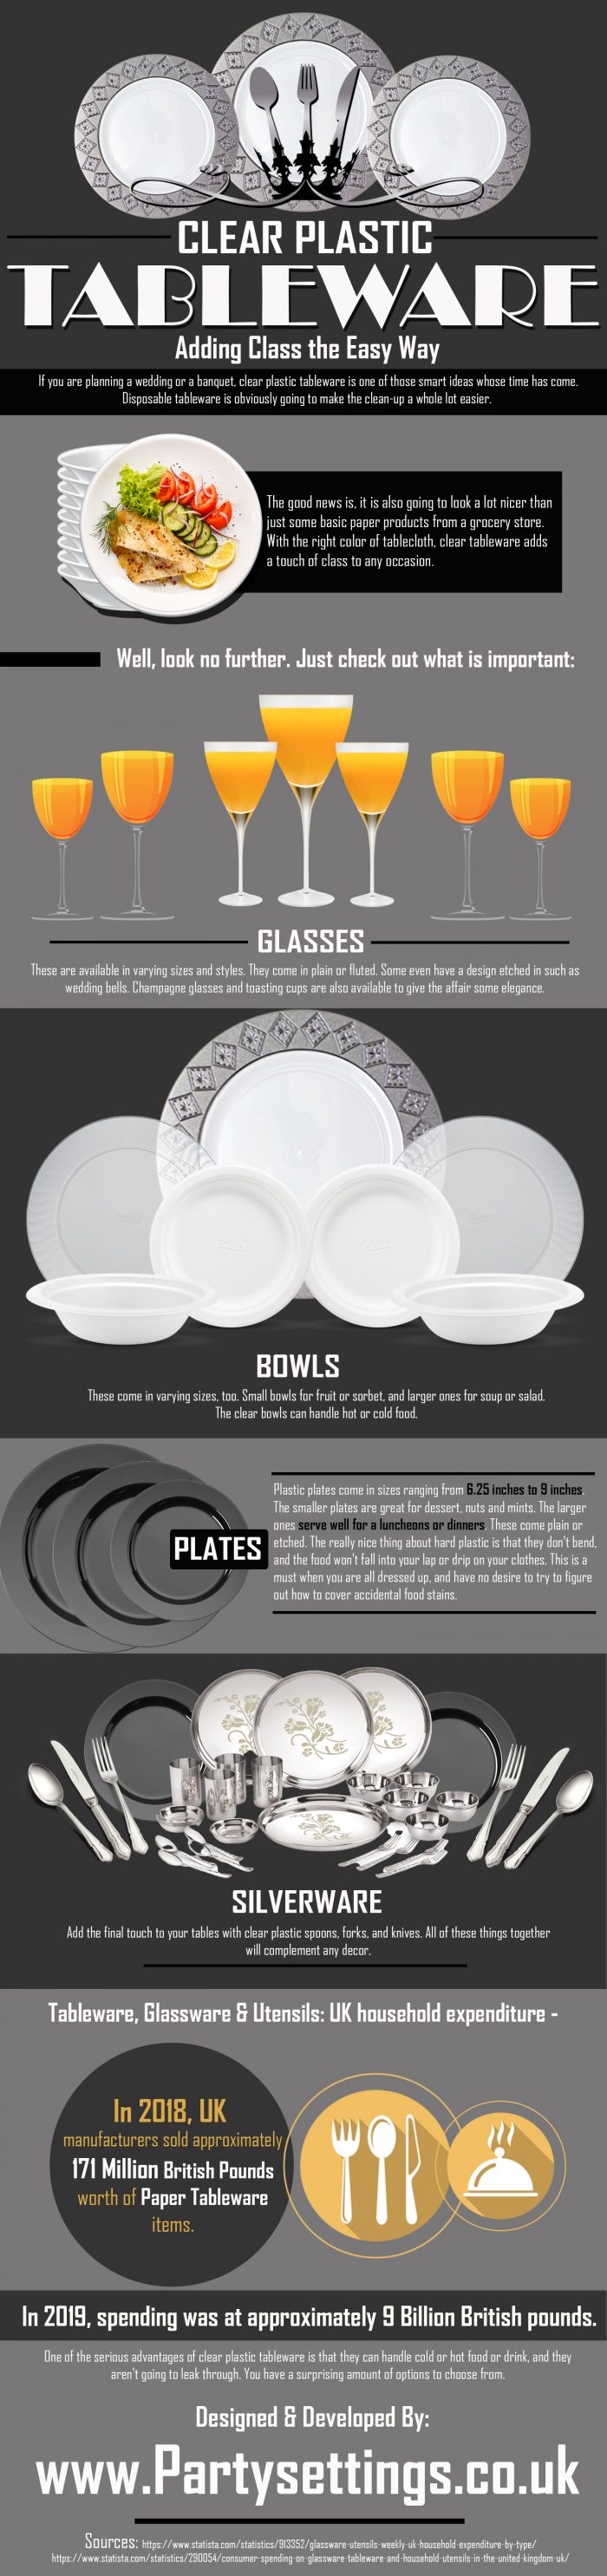 Clear Plastic Tableware – Adding Class the Easy Way